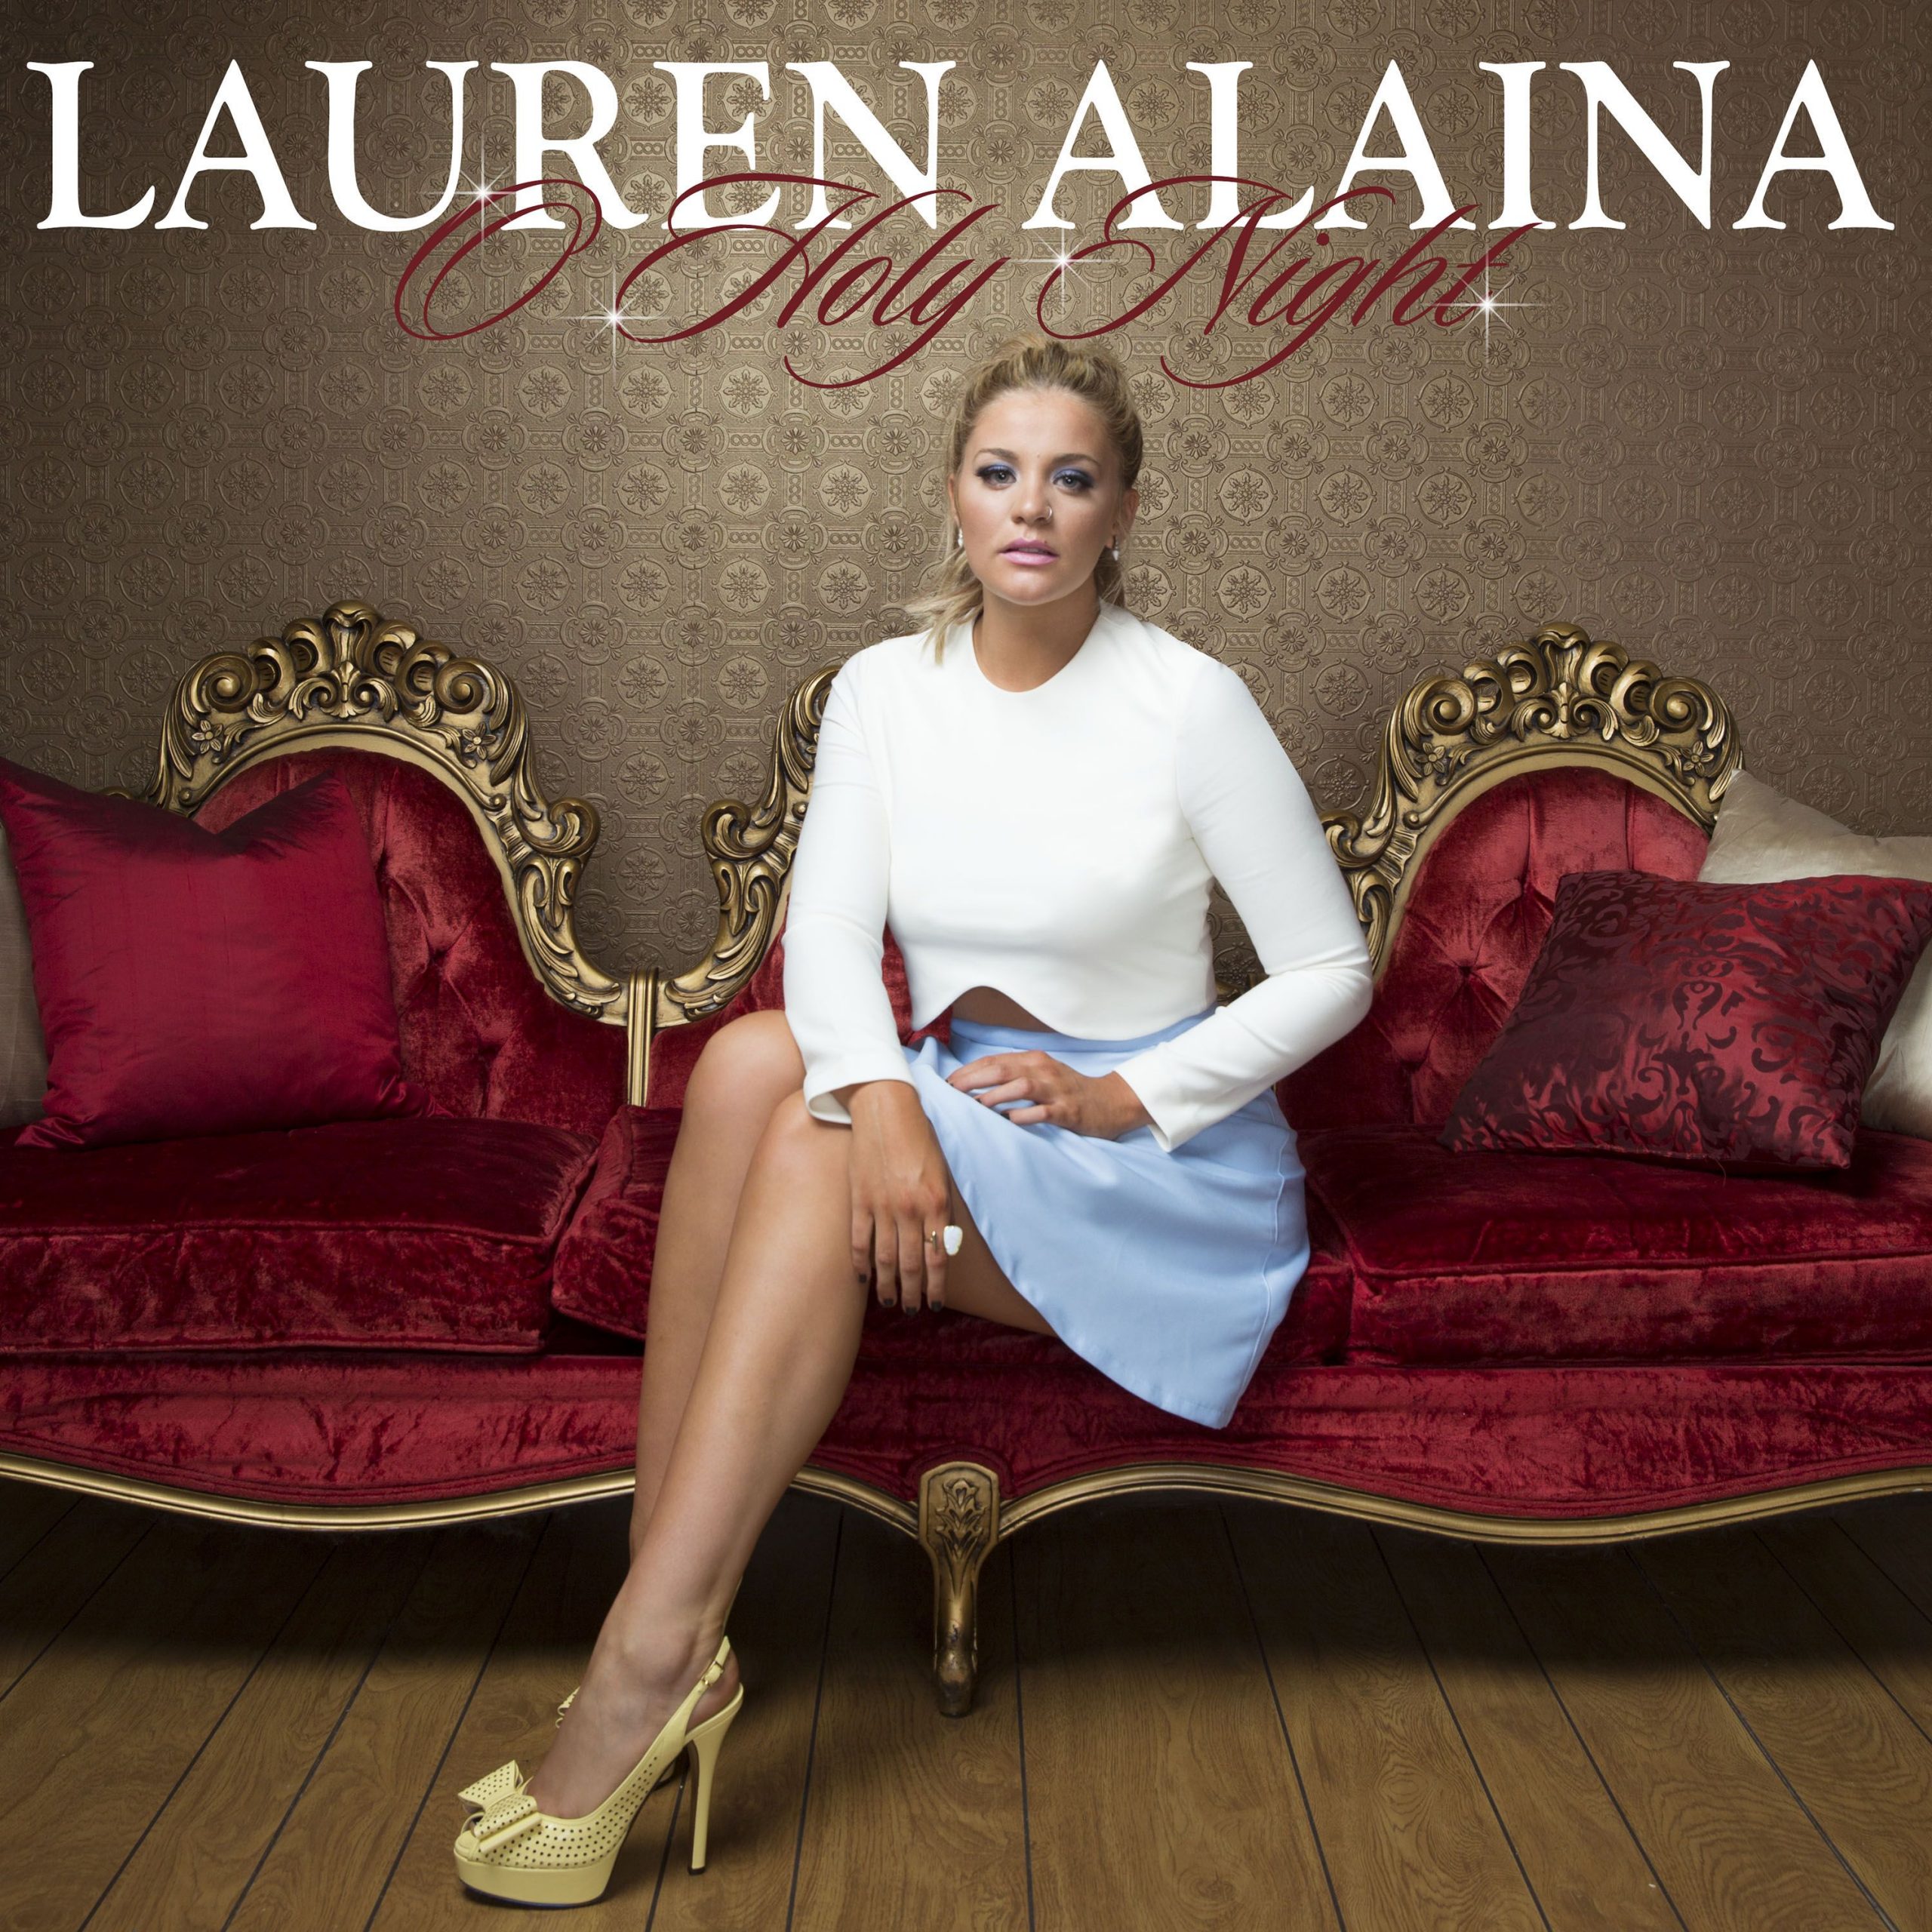 LAUREN ALAINA SHINES ON “O HOLY NIGHT” – AVAILABLE NOW